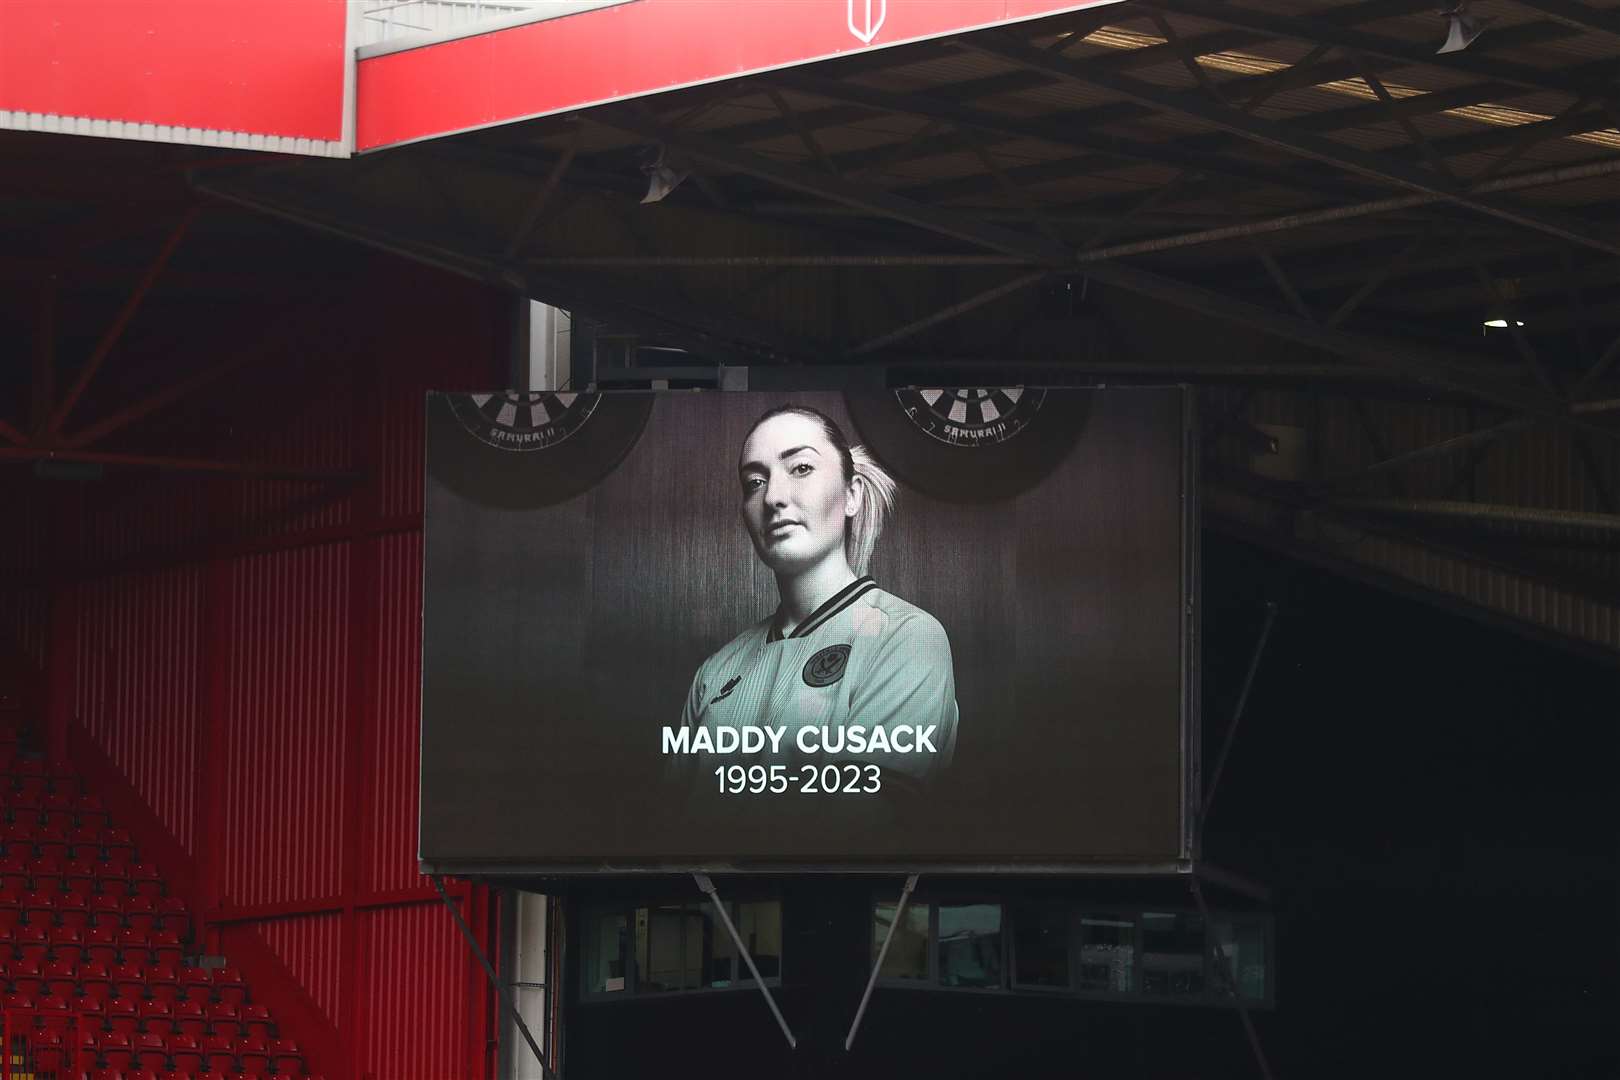 A tribute to Sheffield United player Maddy Cusack was shown on the big screen at Bramall Lane (Tim Markland.PA)